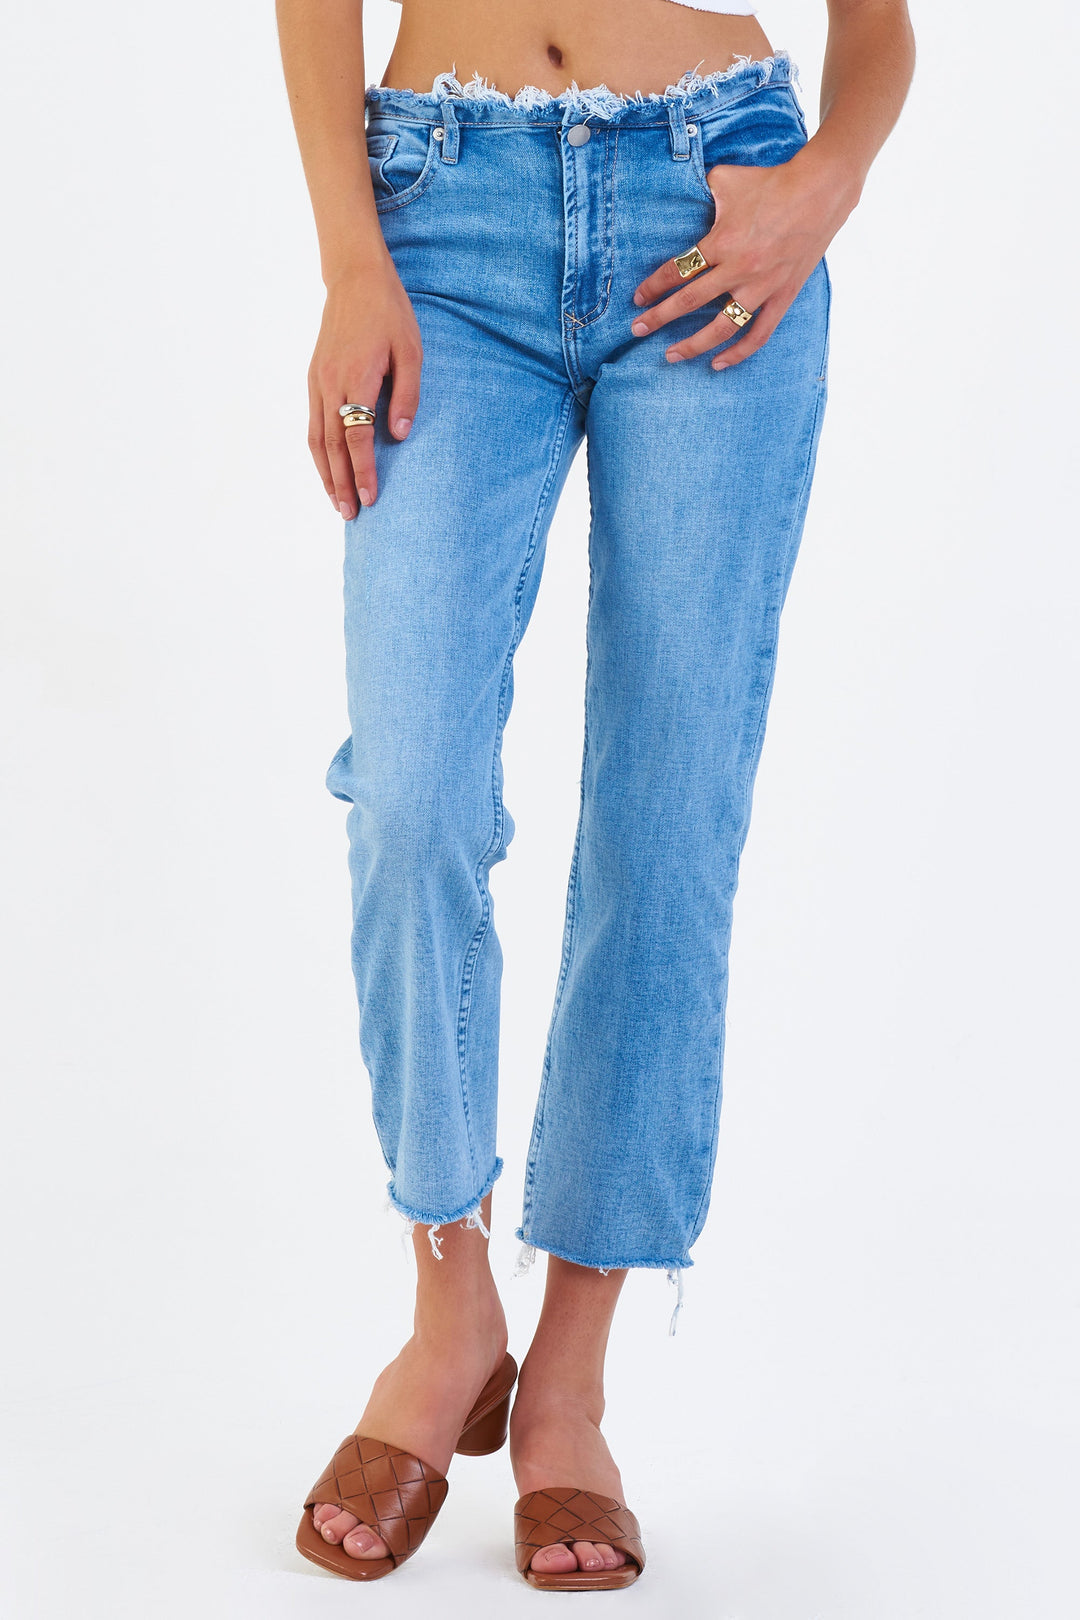 image of a female model wearing a JODI SUPER HIGH RISE CROPPED STRAIGHT LEG JEANS LIBERTY JEANS